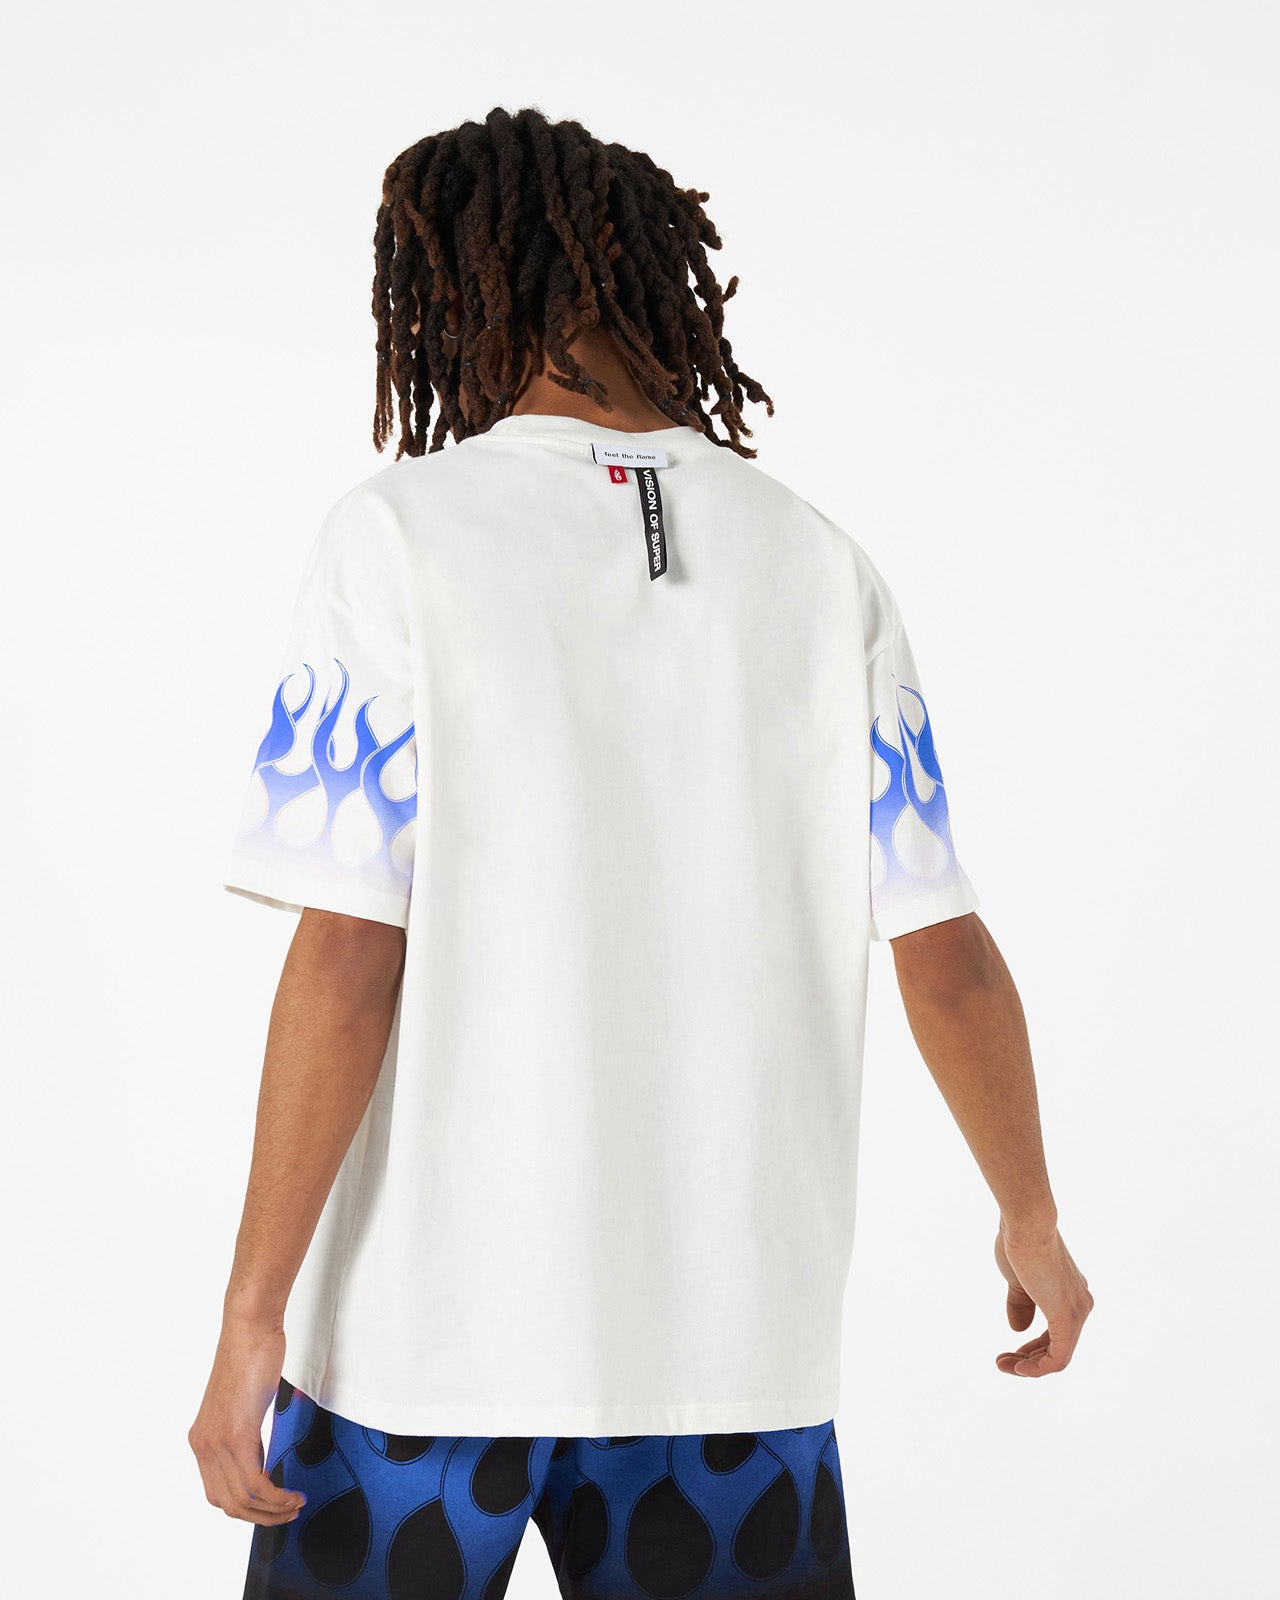 WHITE T-SHIRT WITH BLUE FLAMES